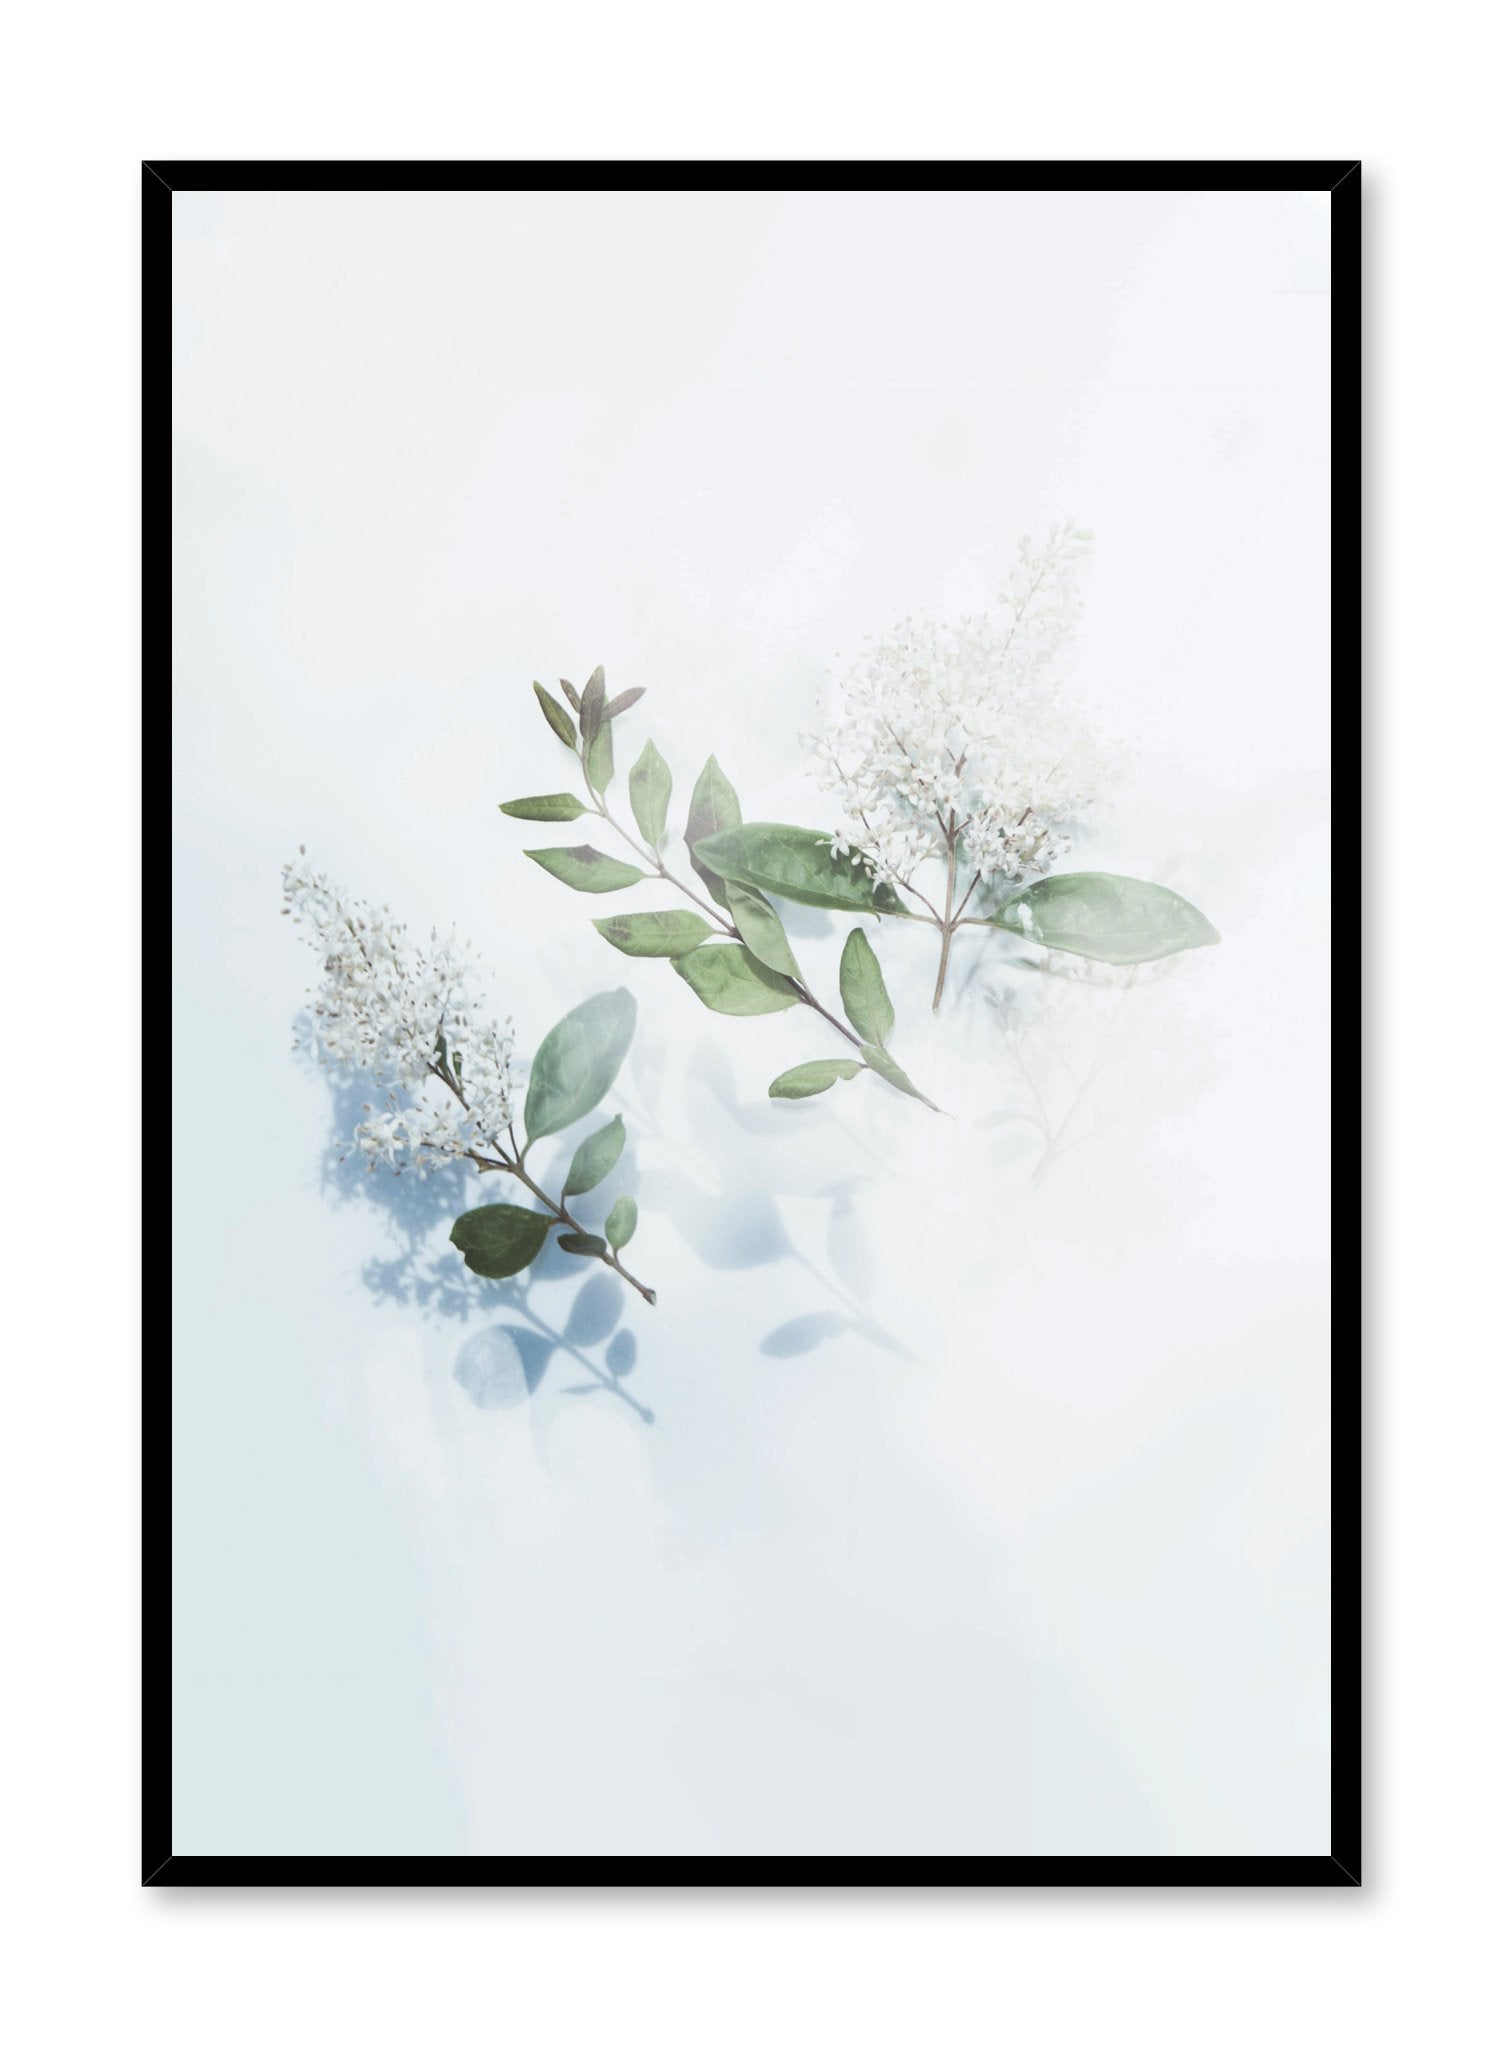 Modern minimalist floral photography poster by Opposite Wall with hazy white flowers on white background